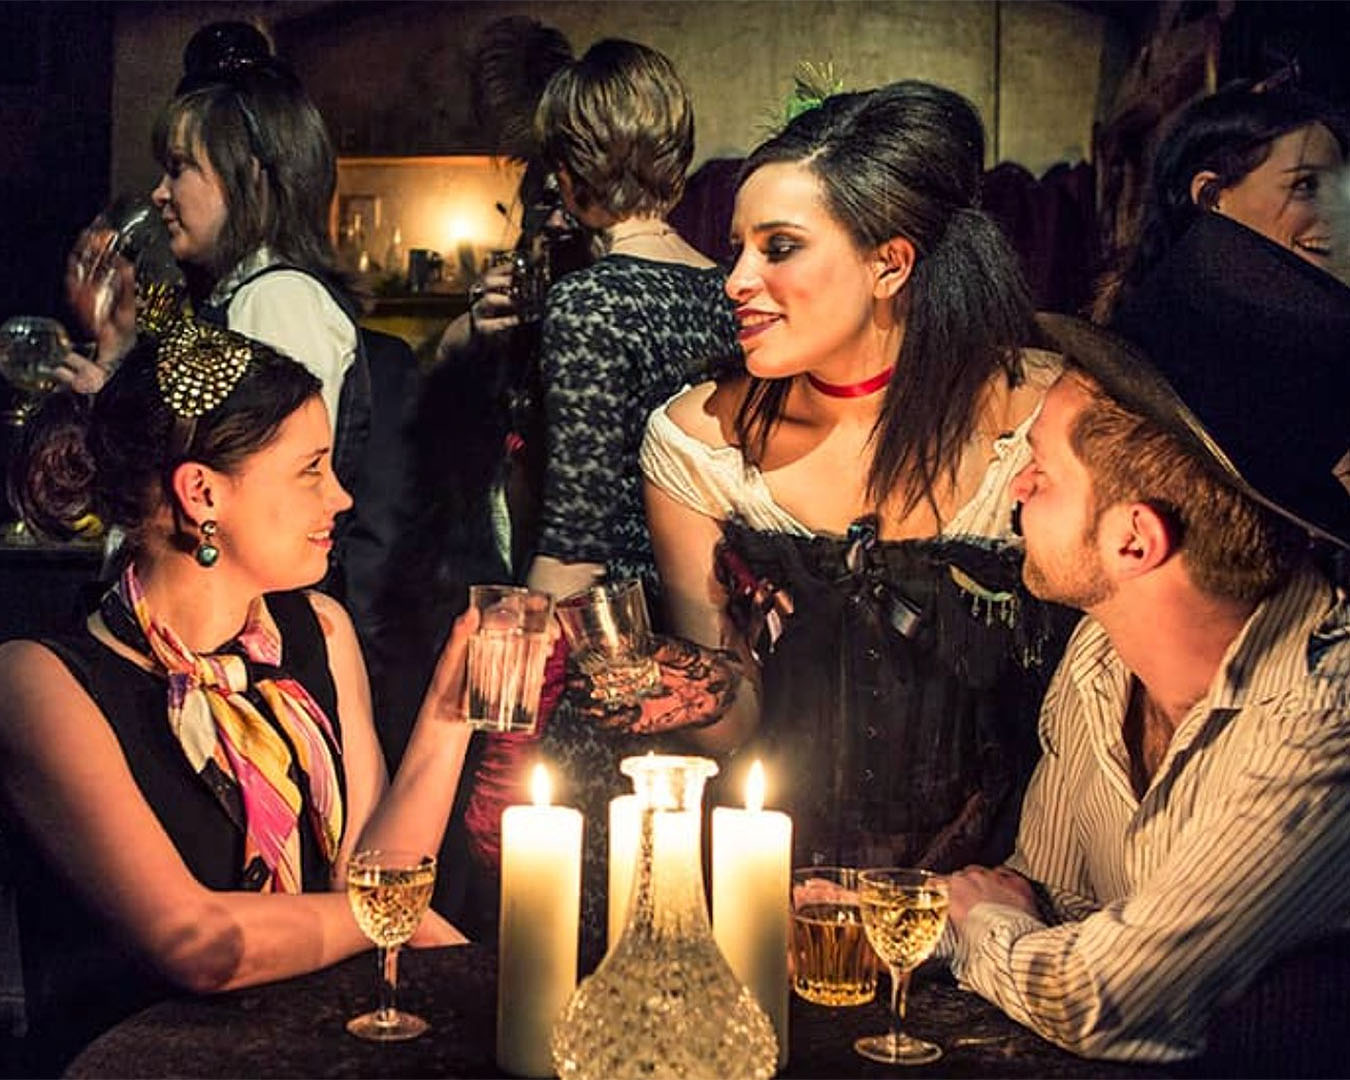 People in period dress enjoy drinks at the Murder Mystery Dinner Theatre.